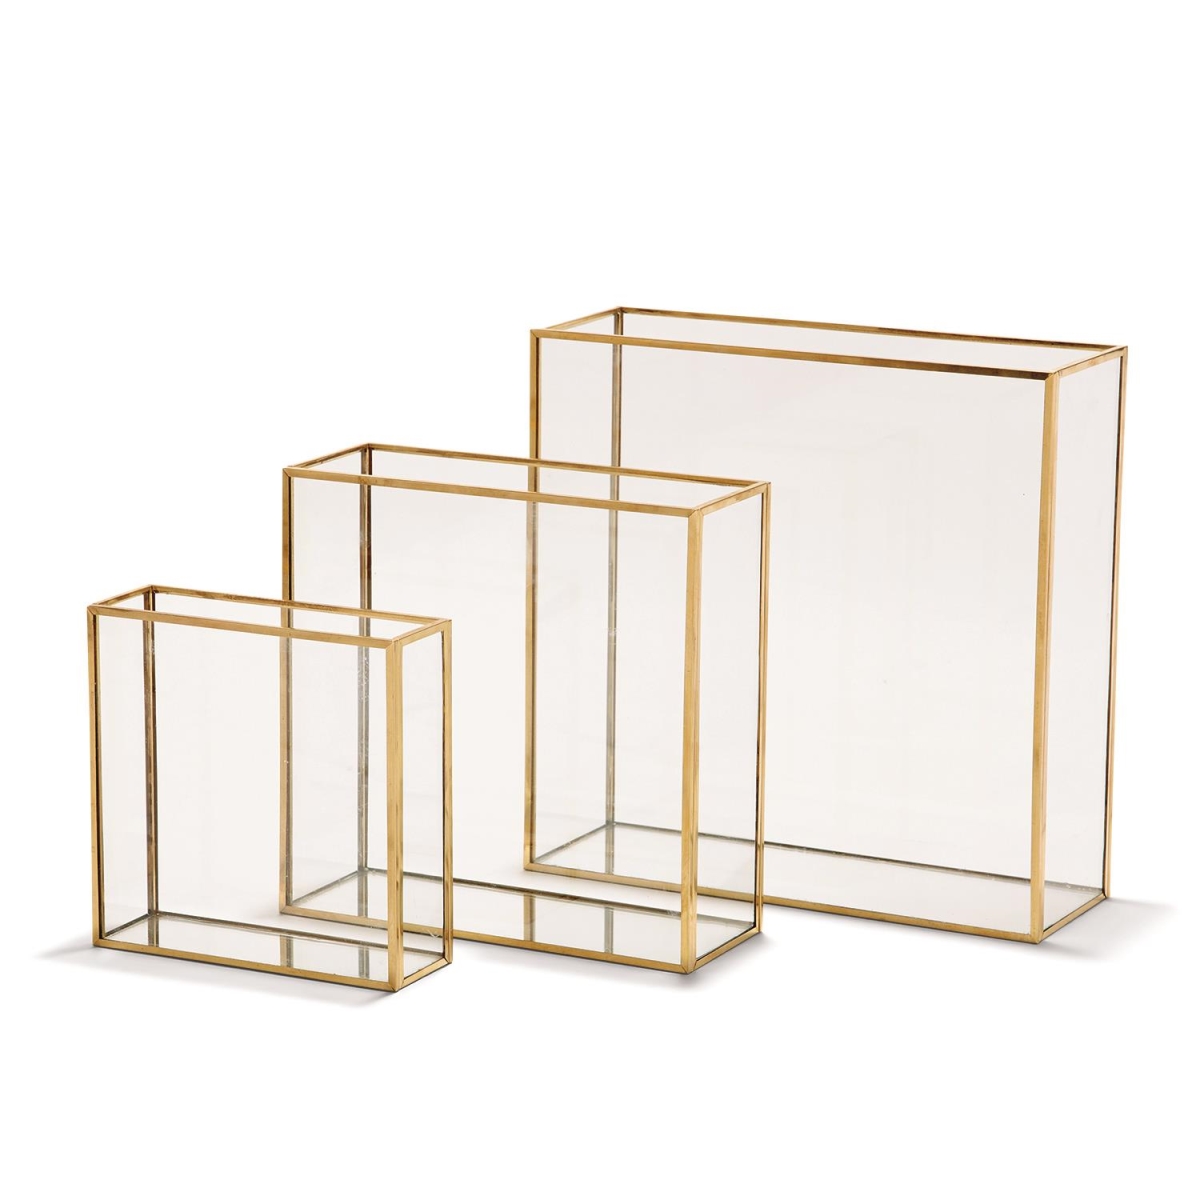 Picture of IKT002-S3 Windows Square Vases with Gold Metal Trim - Set of 3